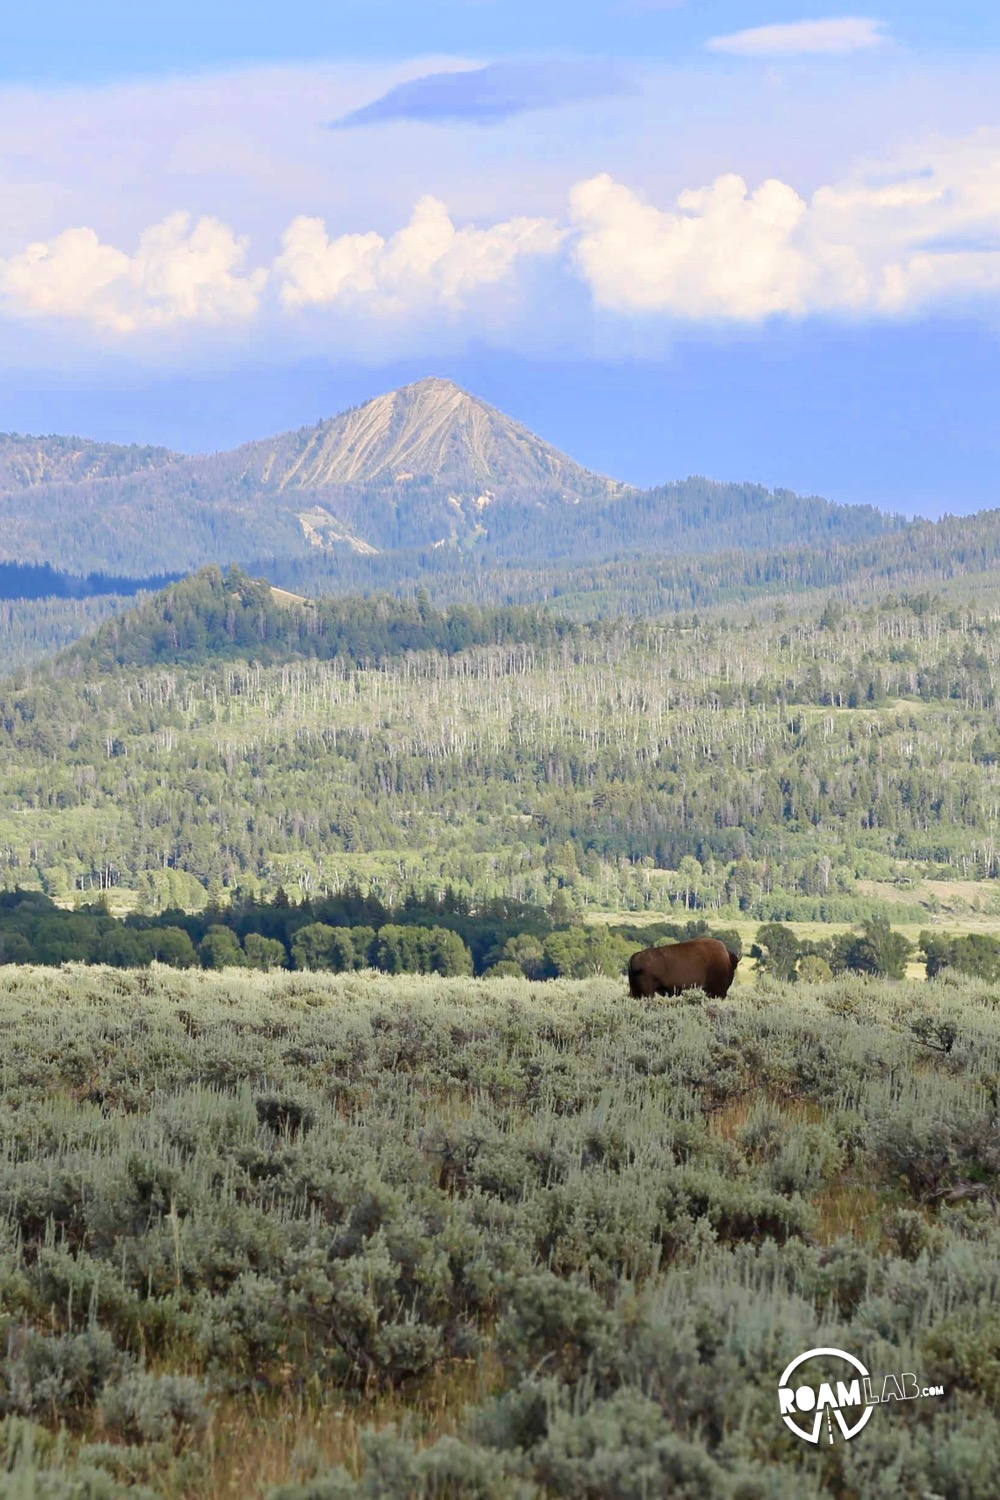 While much of the Grand Teton National Park is paved, there is a rare off-roading opportunity on the River Road. Join buffalo and elk along the Snake River.